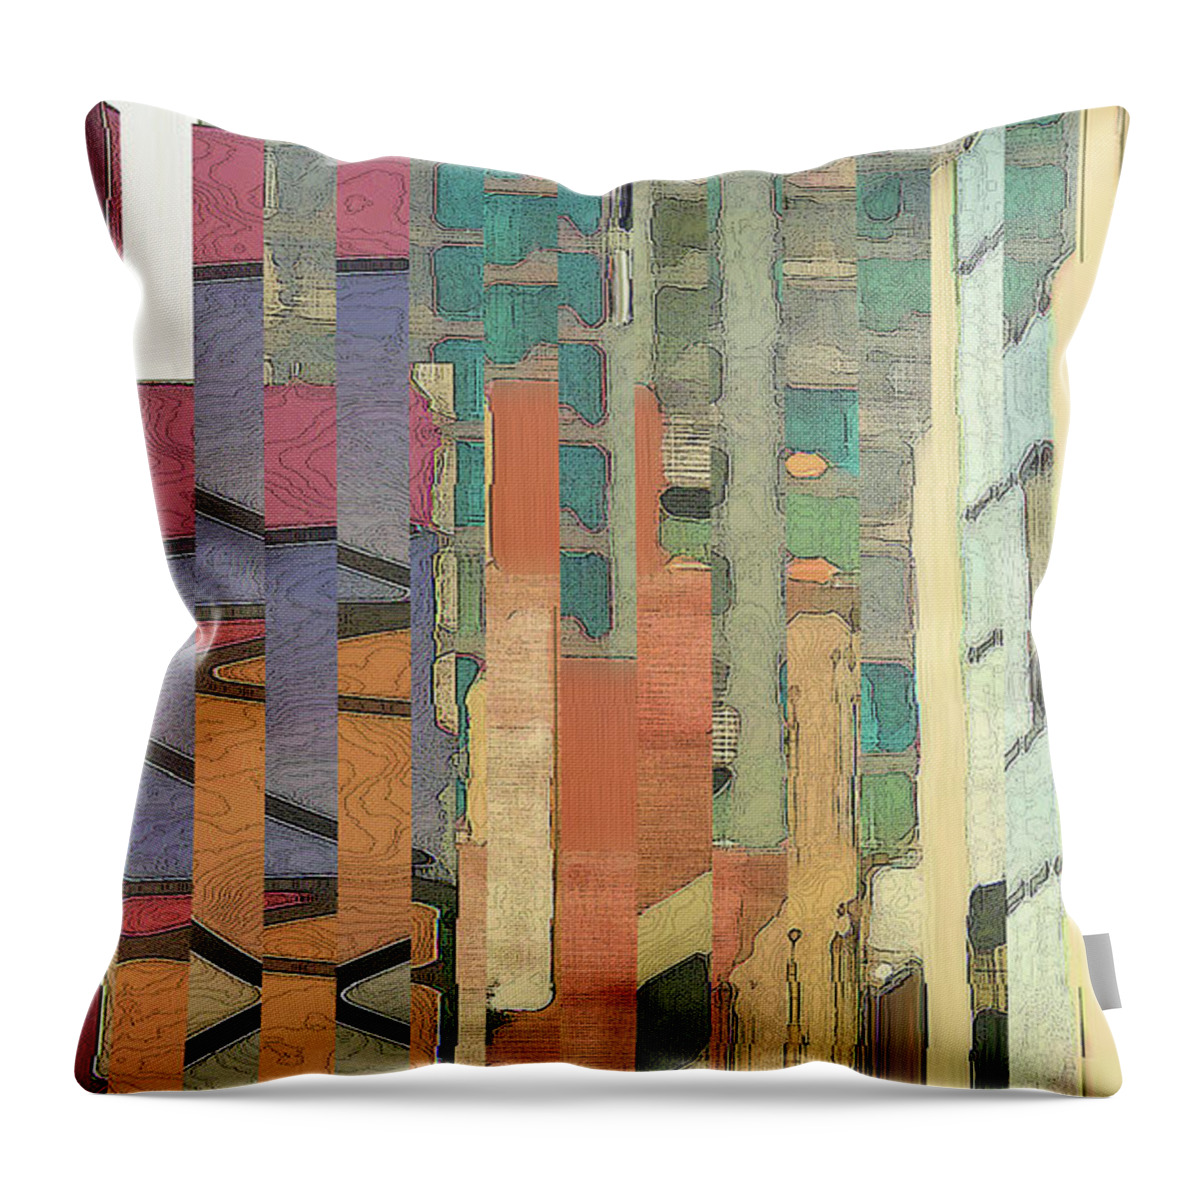 Abstract Throw Pillow featuring the digital art Crenellations by Gina Harrison